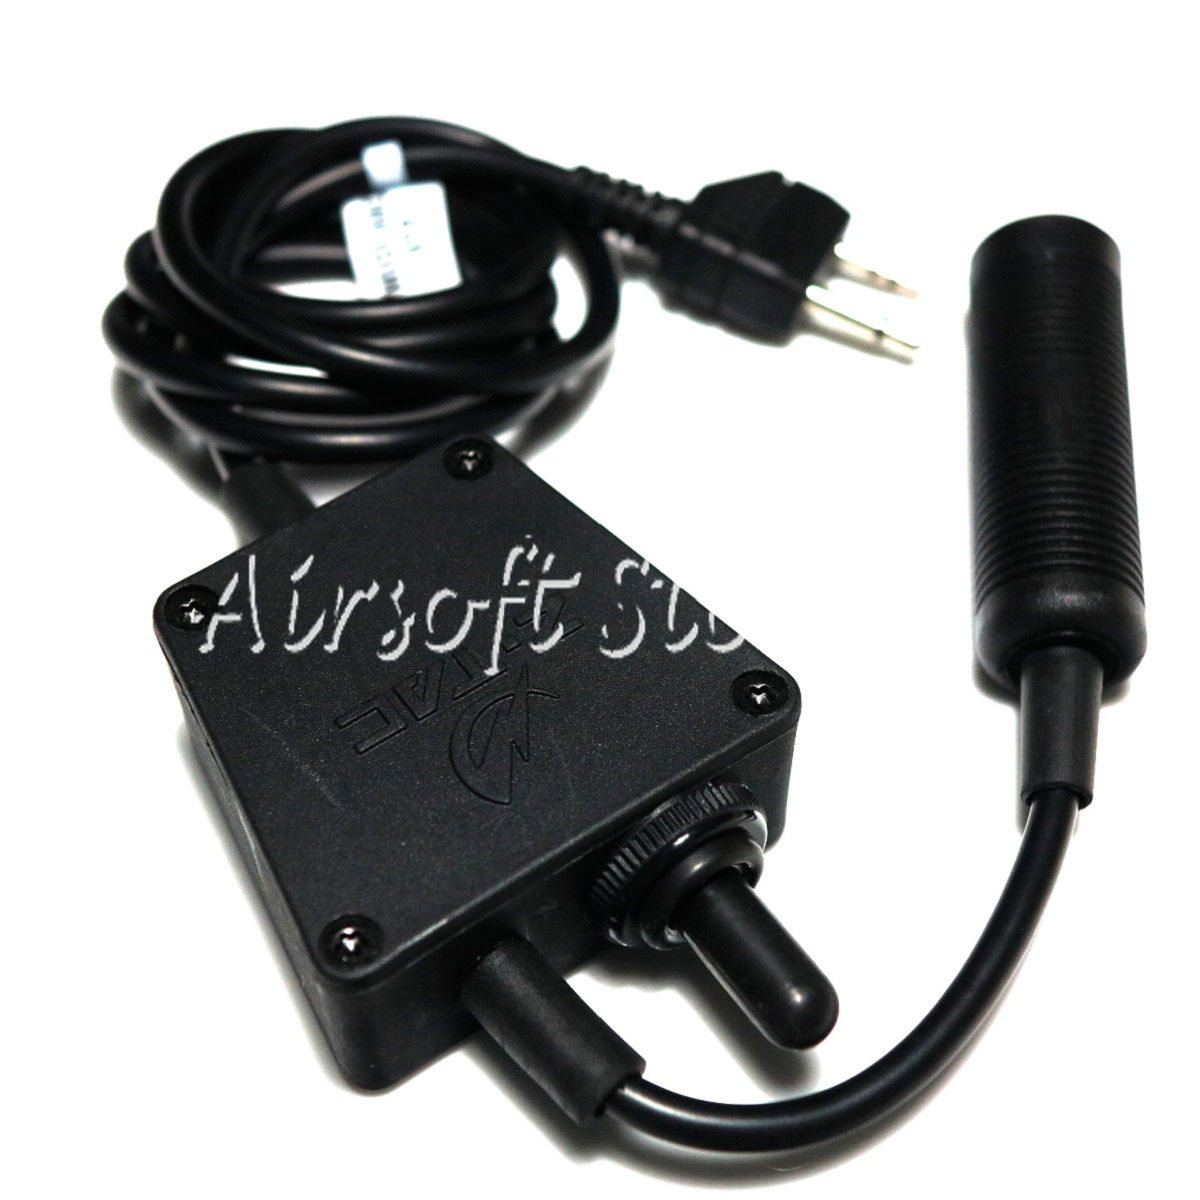 Airsoft SWAT Communications Gear Z Tactical E-Switch Headset PTT for Midland 2 Pin Radio